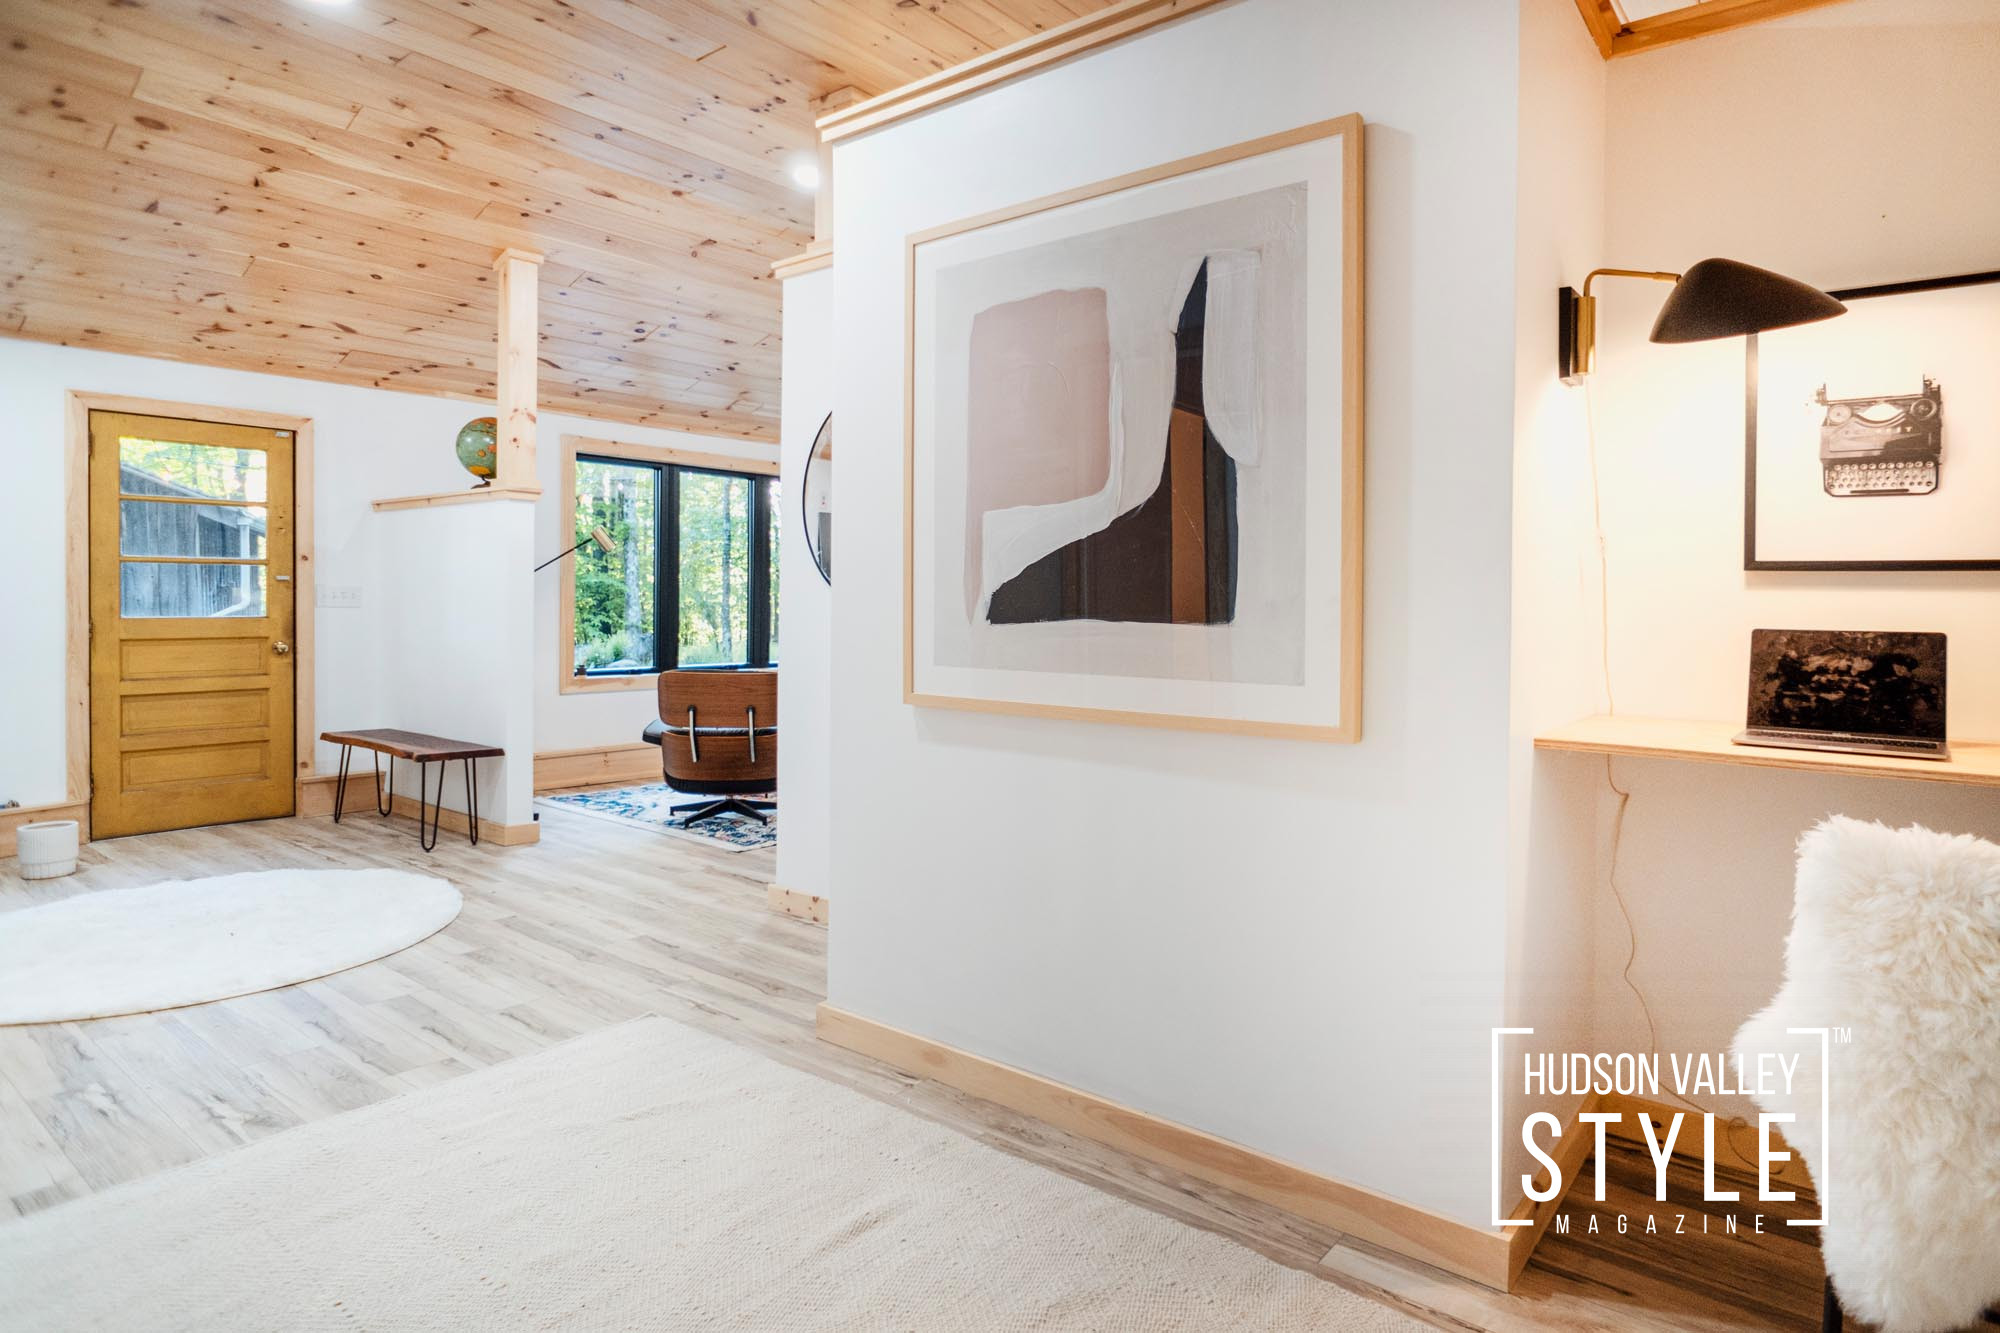 Discover a Cozy Modern Rustic Cabin With Stunning Views of the Catskill Mountains – Presented by Alluvion Vacations – Photography by Maxwell Alexander / Alluvion Media